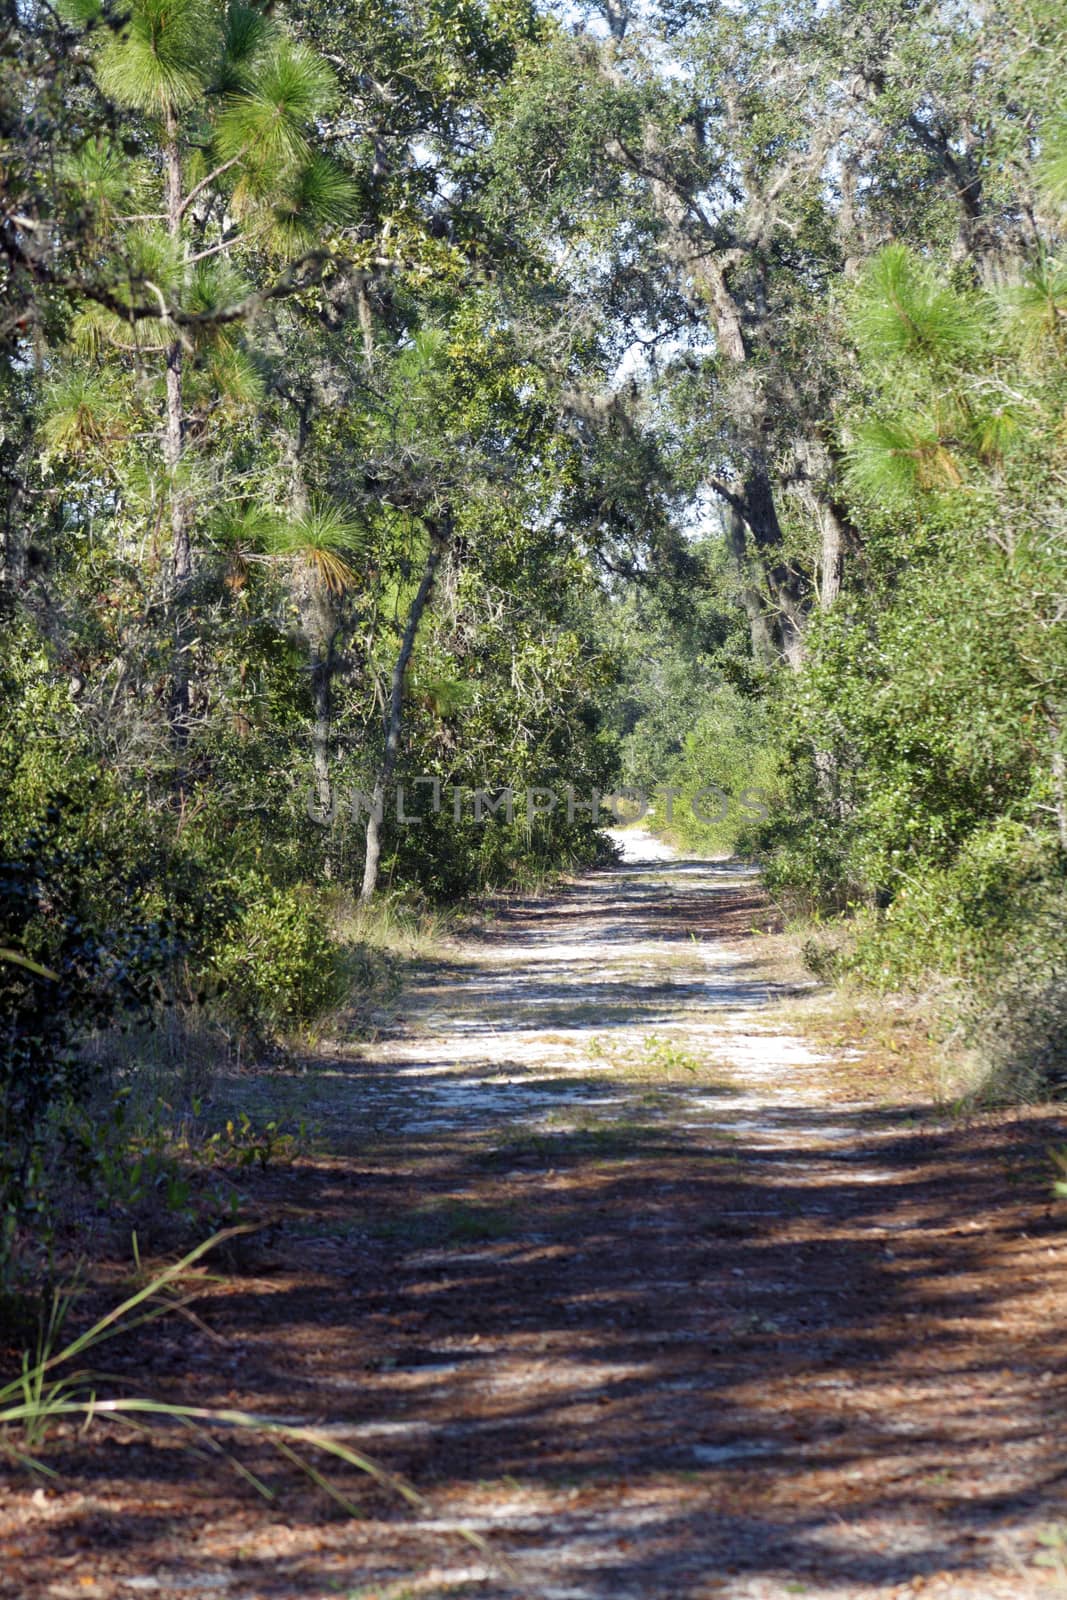 Trail Through a Southern Pine Forest (6) by csproductions